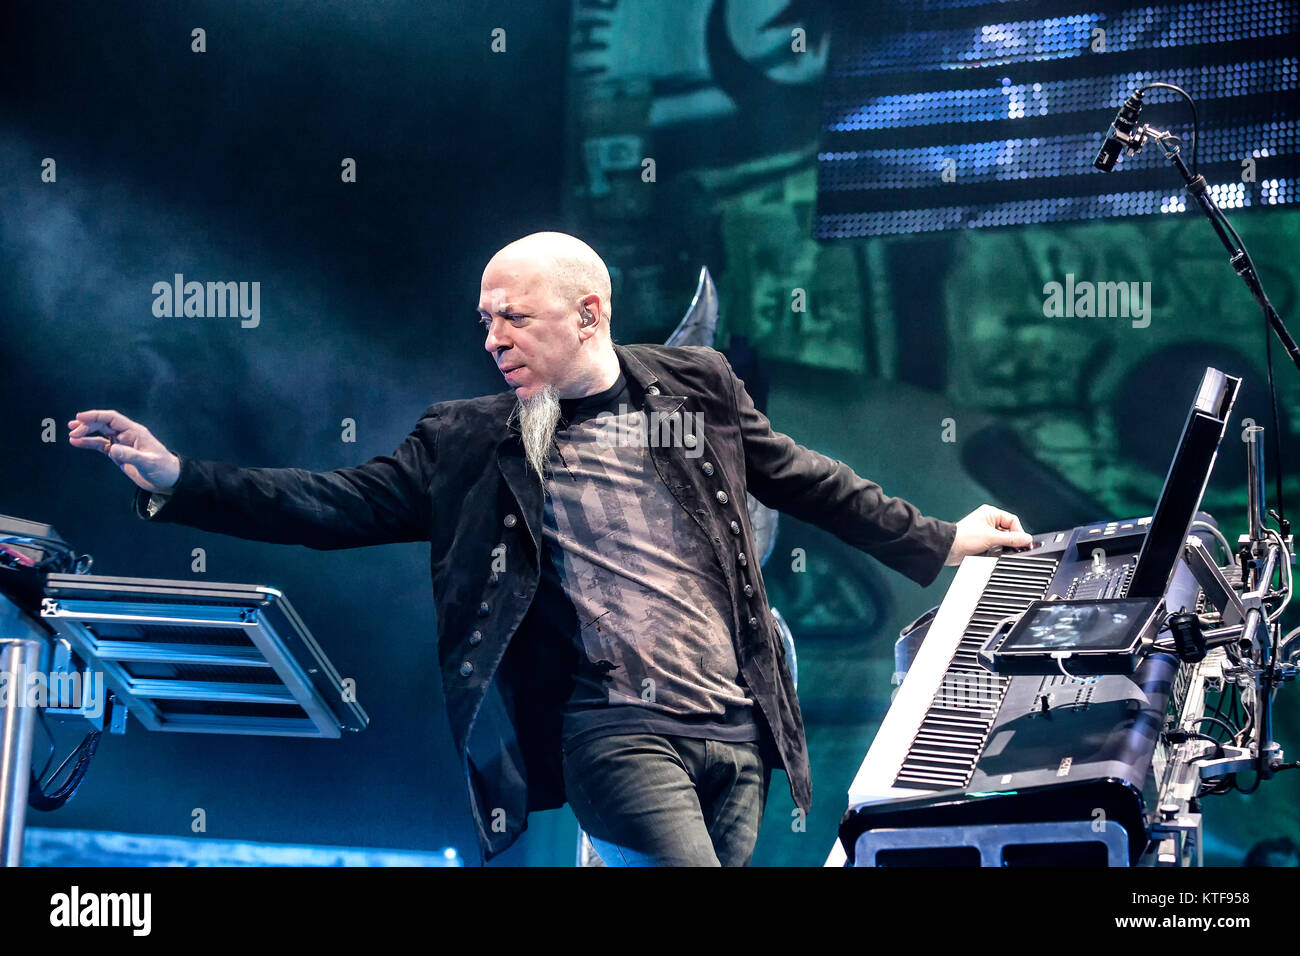 The American progressive metal band Dream Theater performs a live concert  at Oslo Spektrum. Here musician Jordan Rudess on keyboards is seen live on  stage. Norway, 21/02 2014 Stock Photo - Alamy